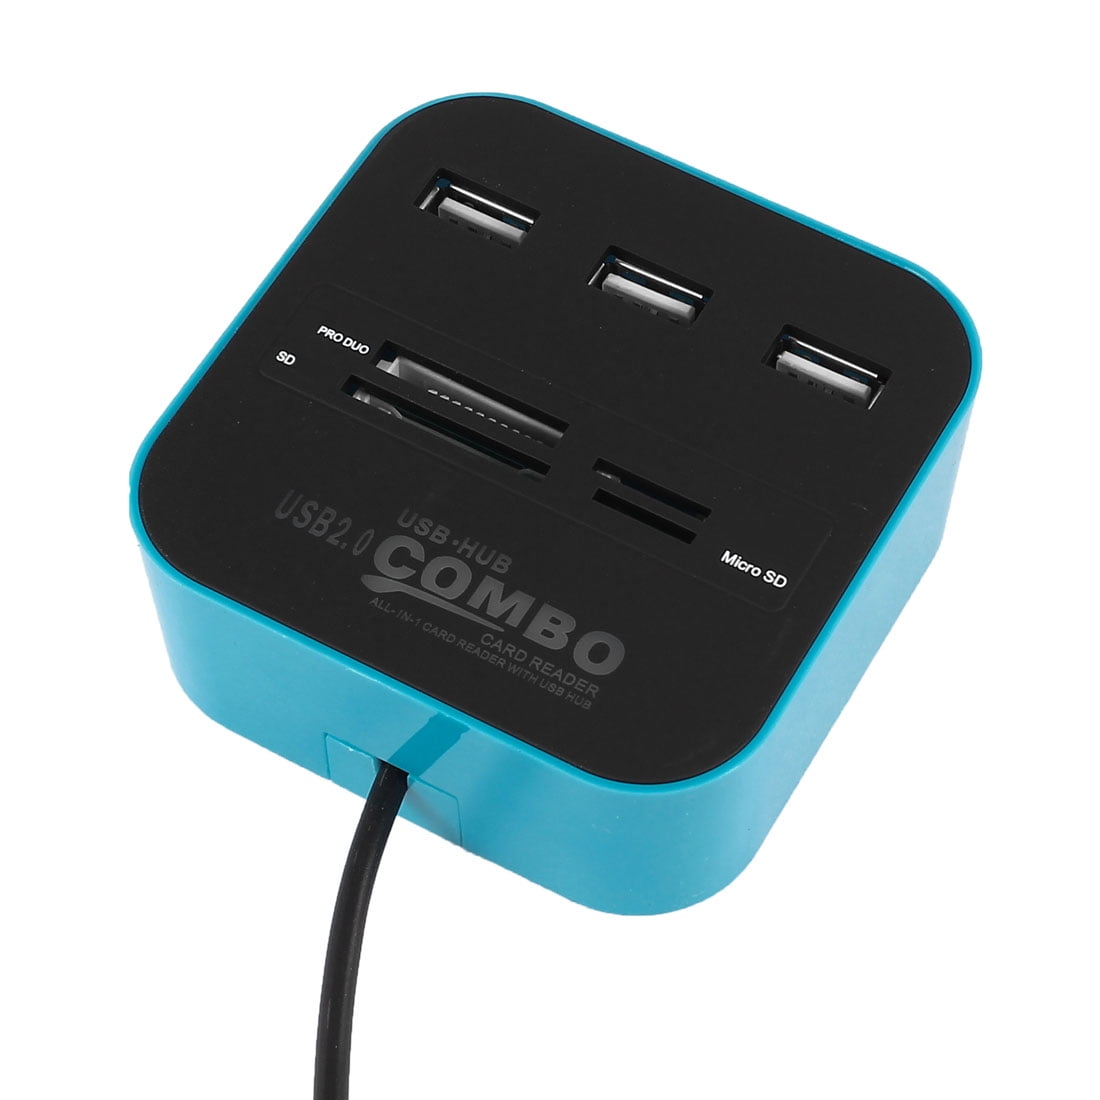 All In 1 Combo Hub USB 2.0 3 Ports Card Reader for SD MMC M2 MS Pro Duo Blue Value-5-Star 